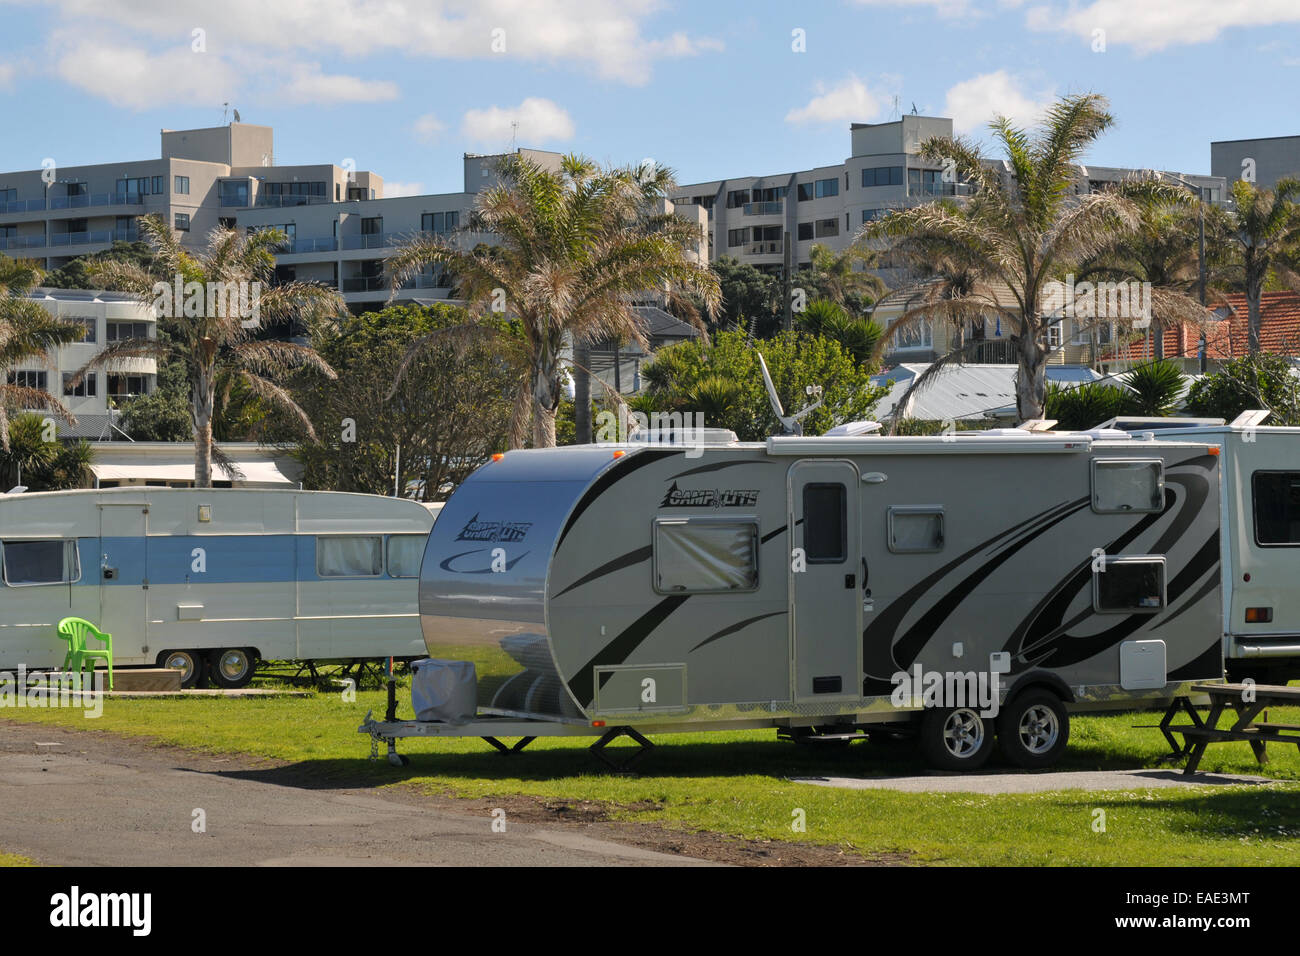 Large two axle caravan parked in caravan park located among apartment buildings and palm trees. Stock Photo